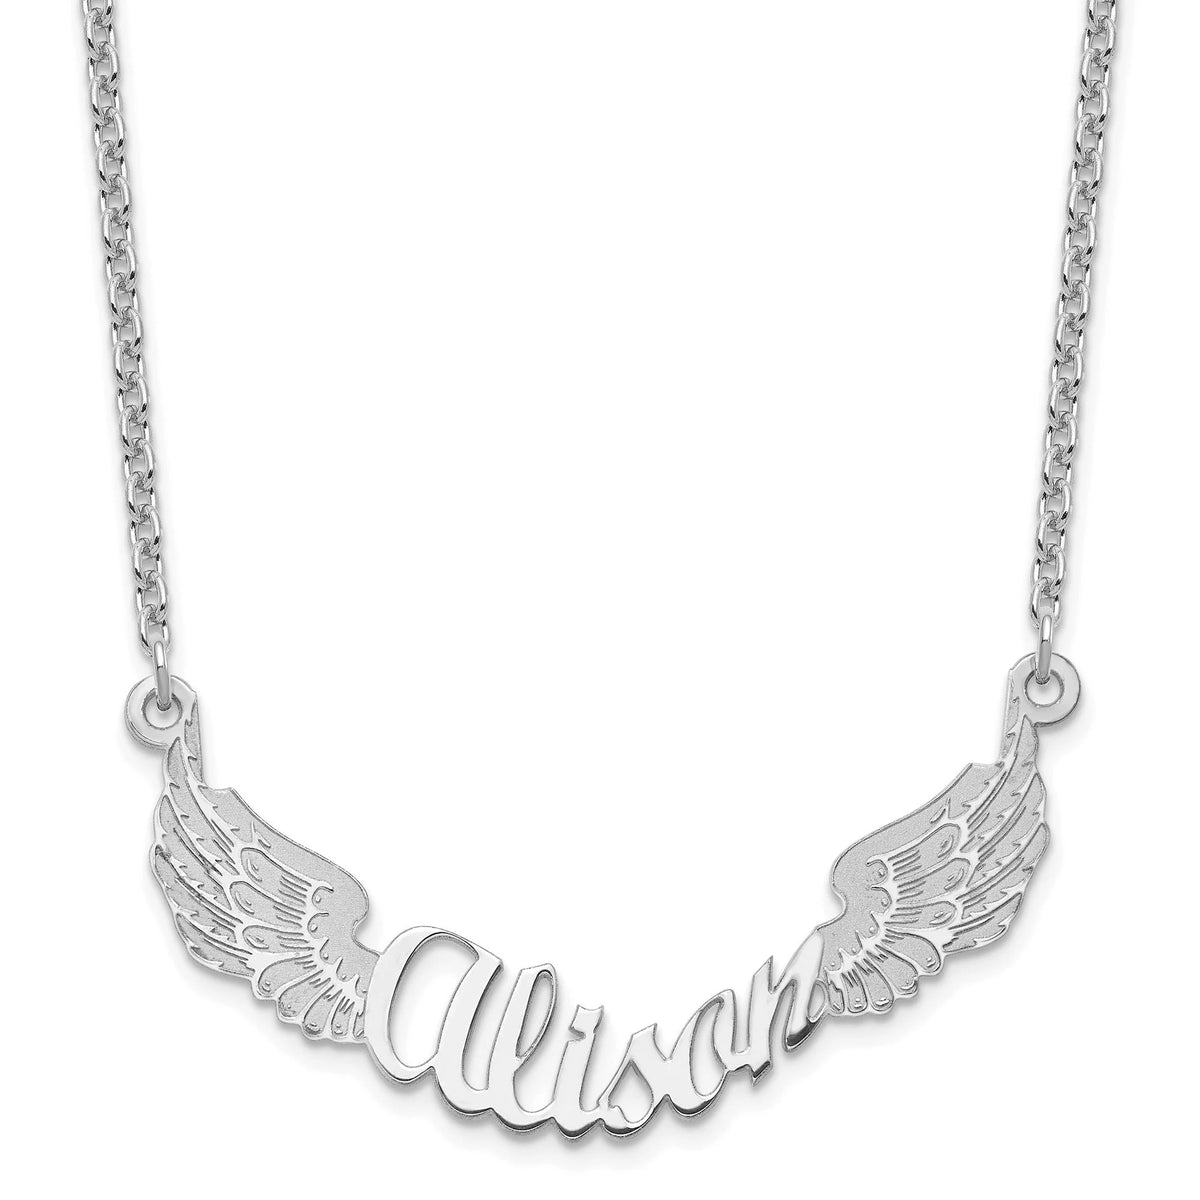 Personalized Angel Wing Name Necklace in Sterling Silver, 10k, or 14k Gold Chain  (1.55 inches wide) Gift Box Included